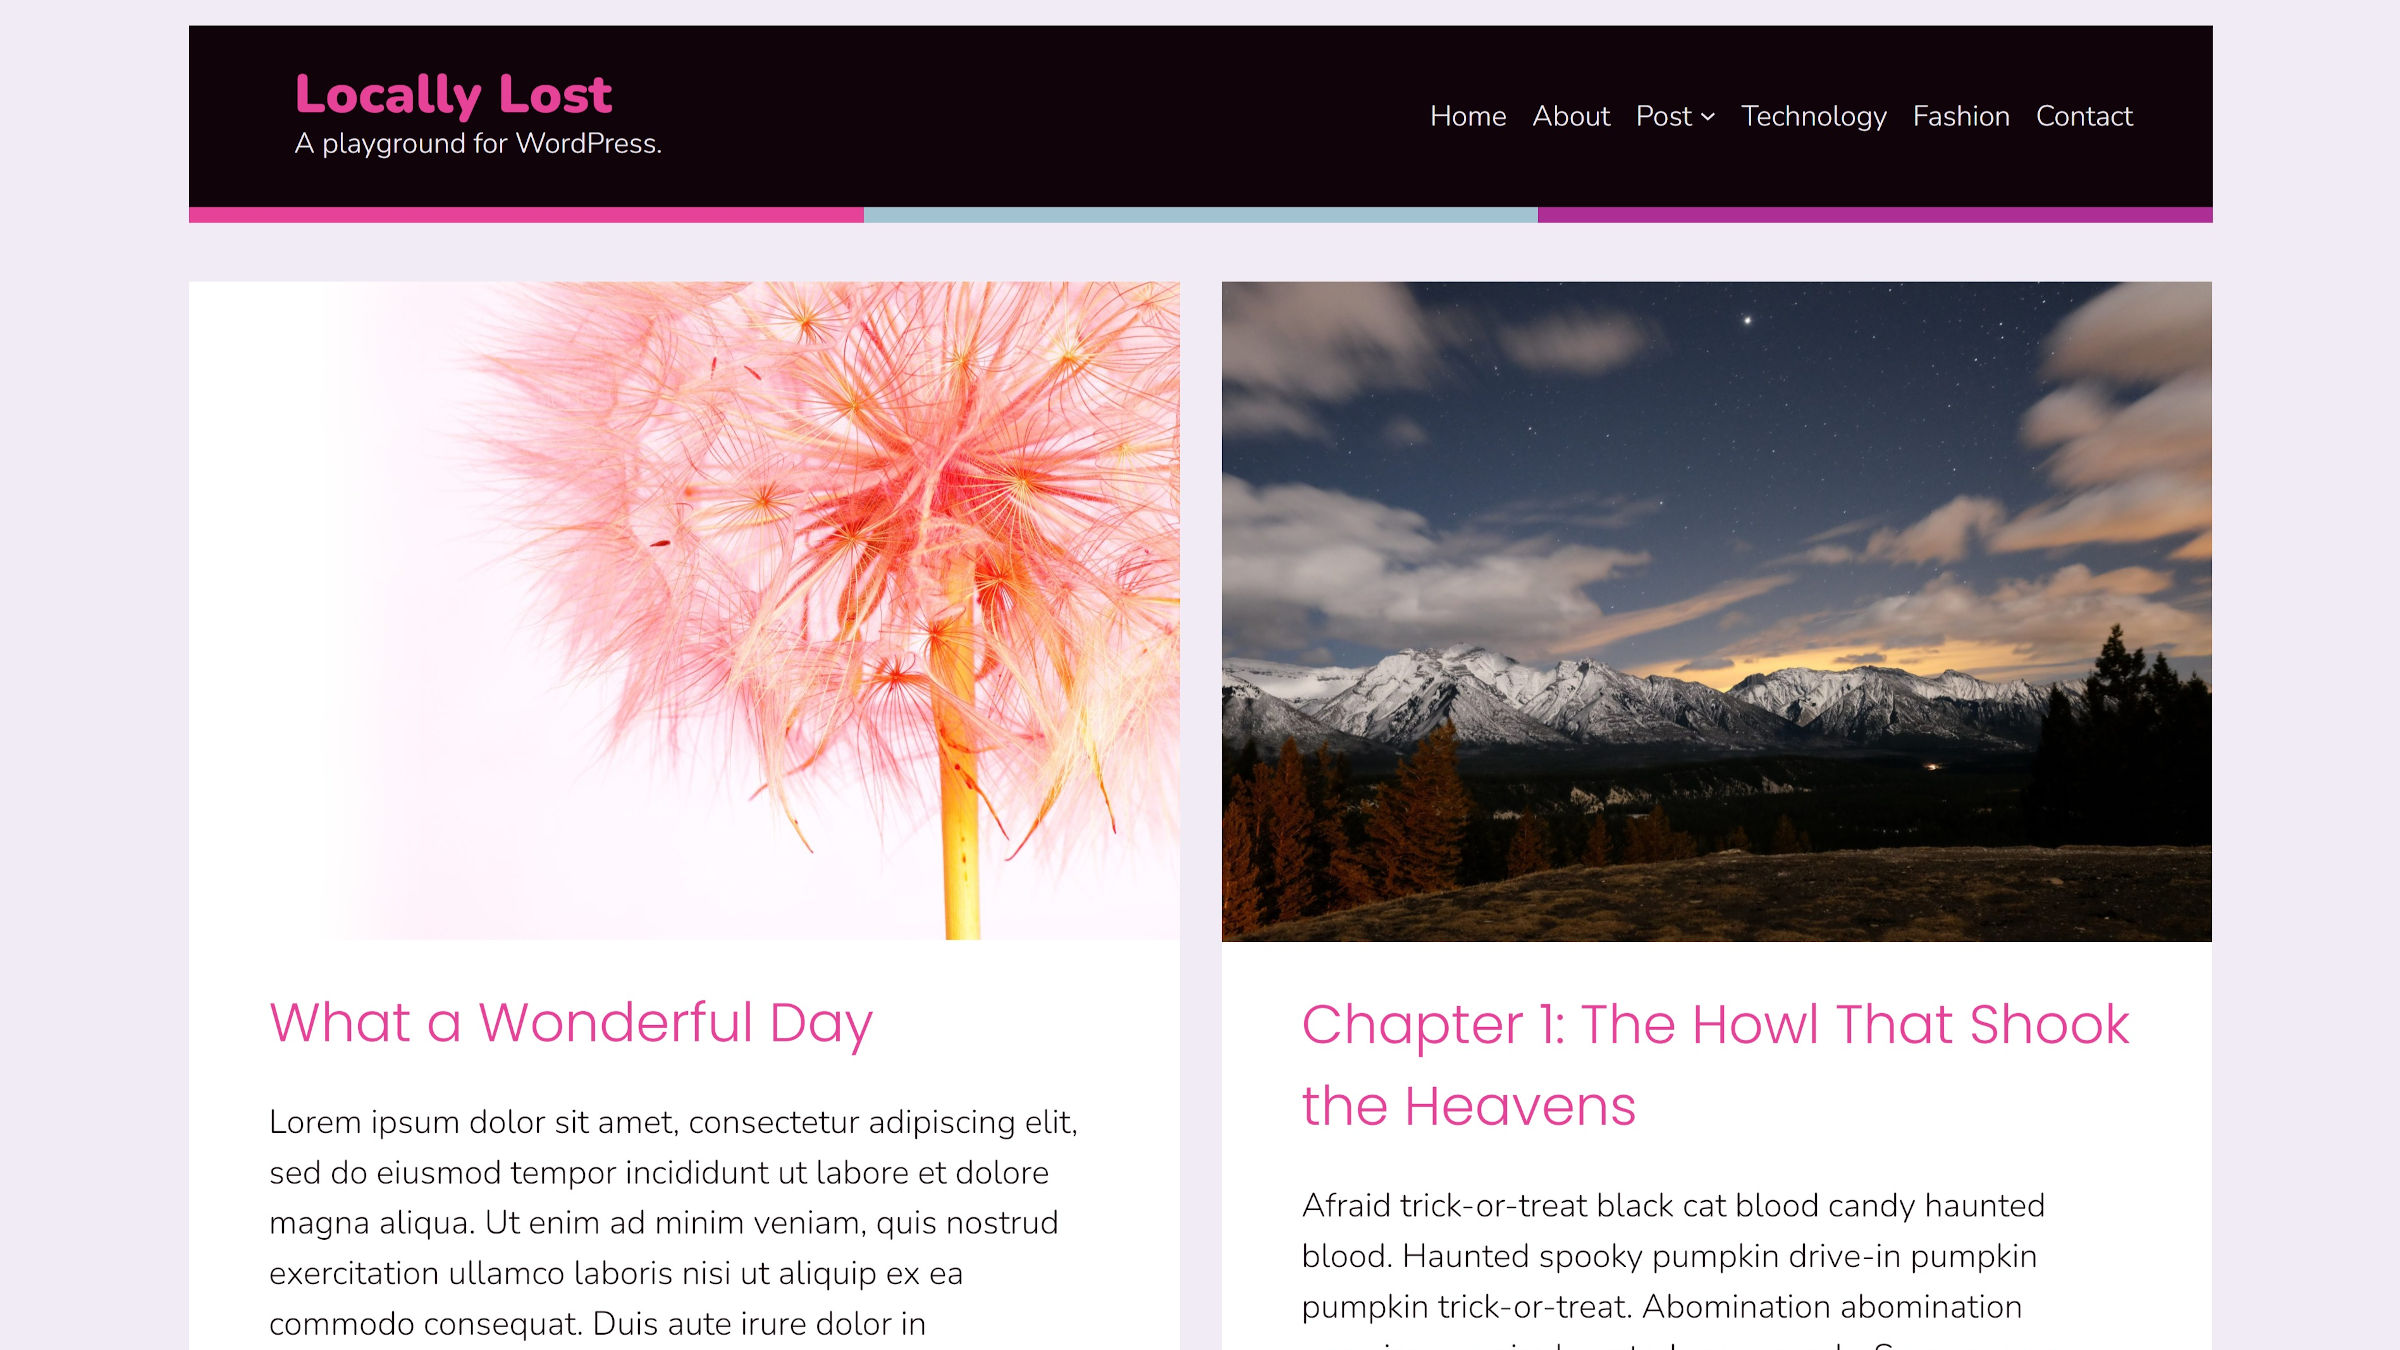 Blog posts page as shown via the Alara theme.  It has a black header with blue, pink, and purple dashes across the bottom border.  Following that is a two-column grid of posts with their featured images.